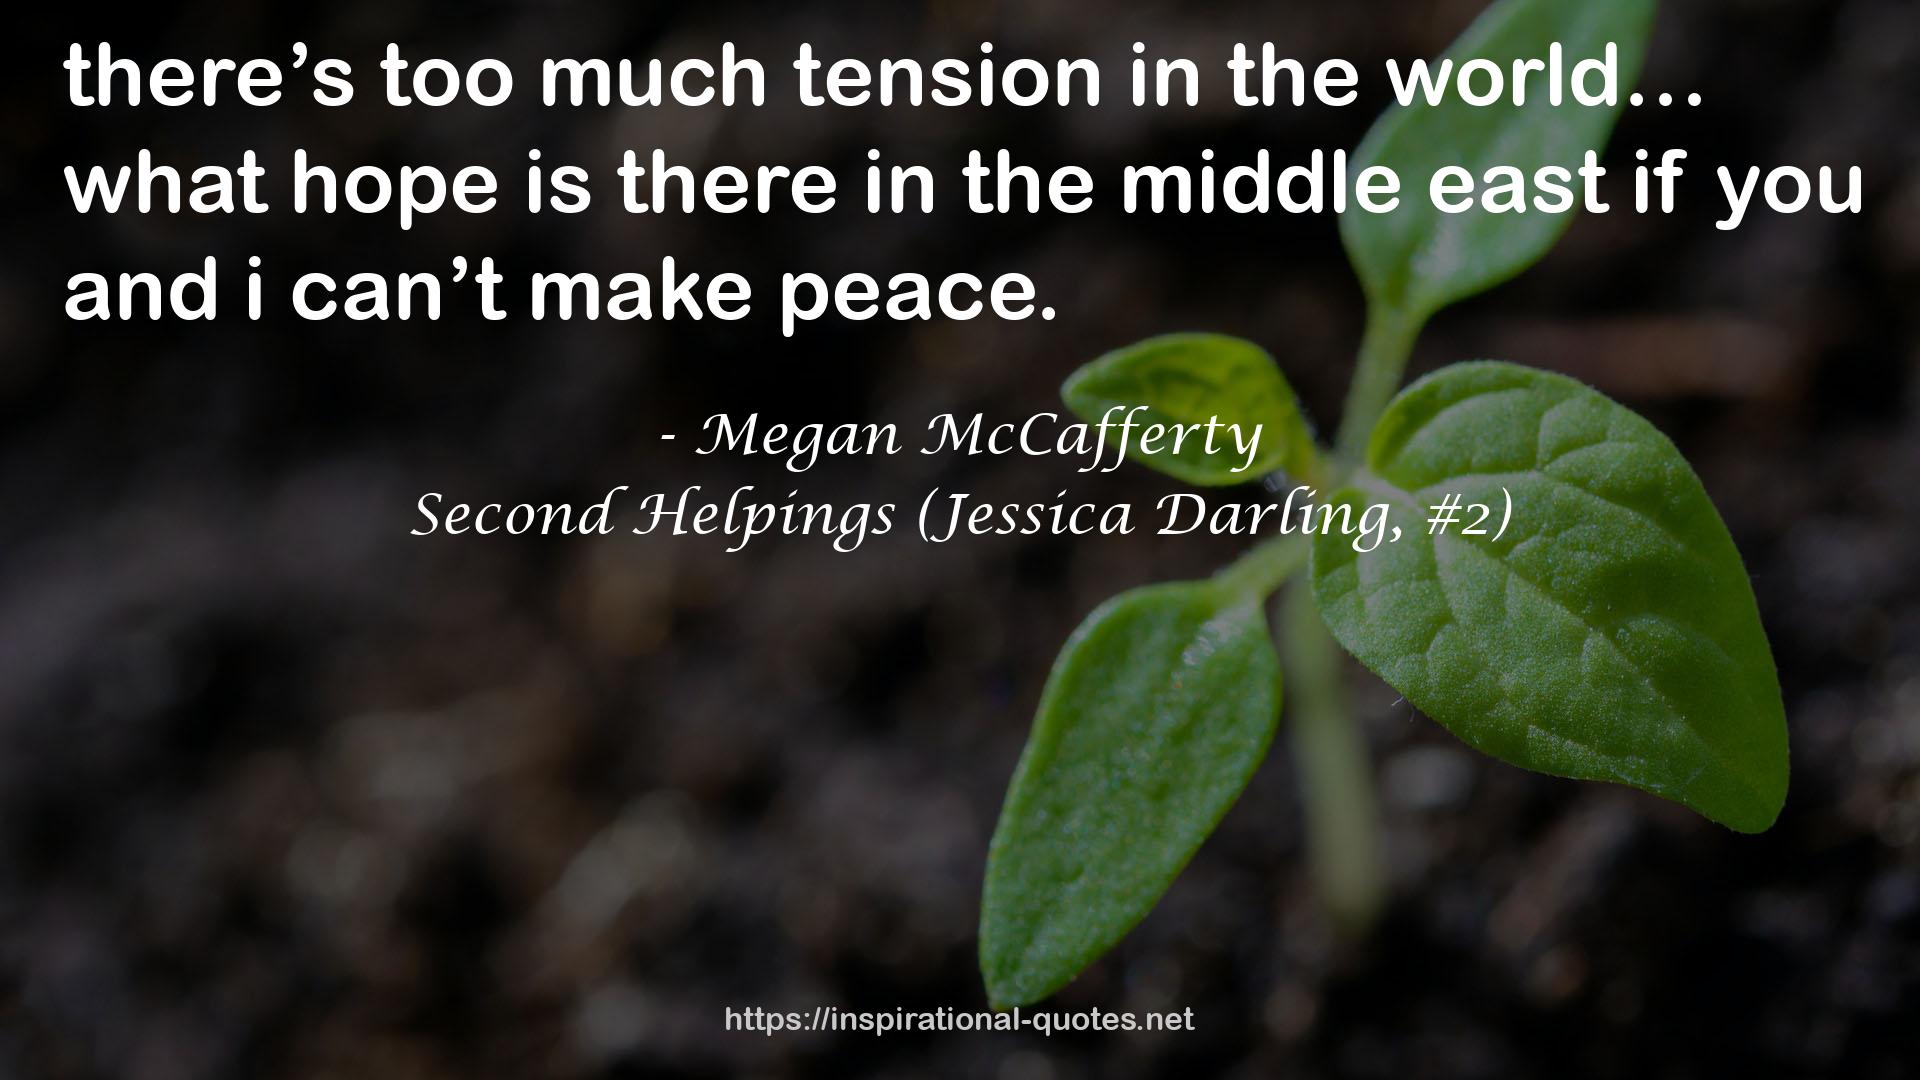 Second Helpings (Jessica Darling, #2) QUOTES